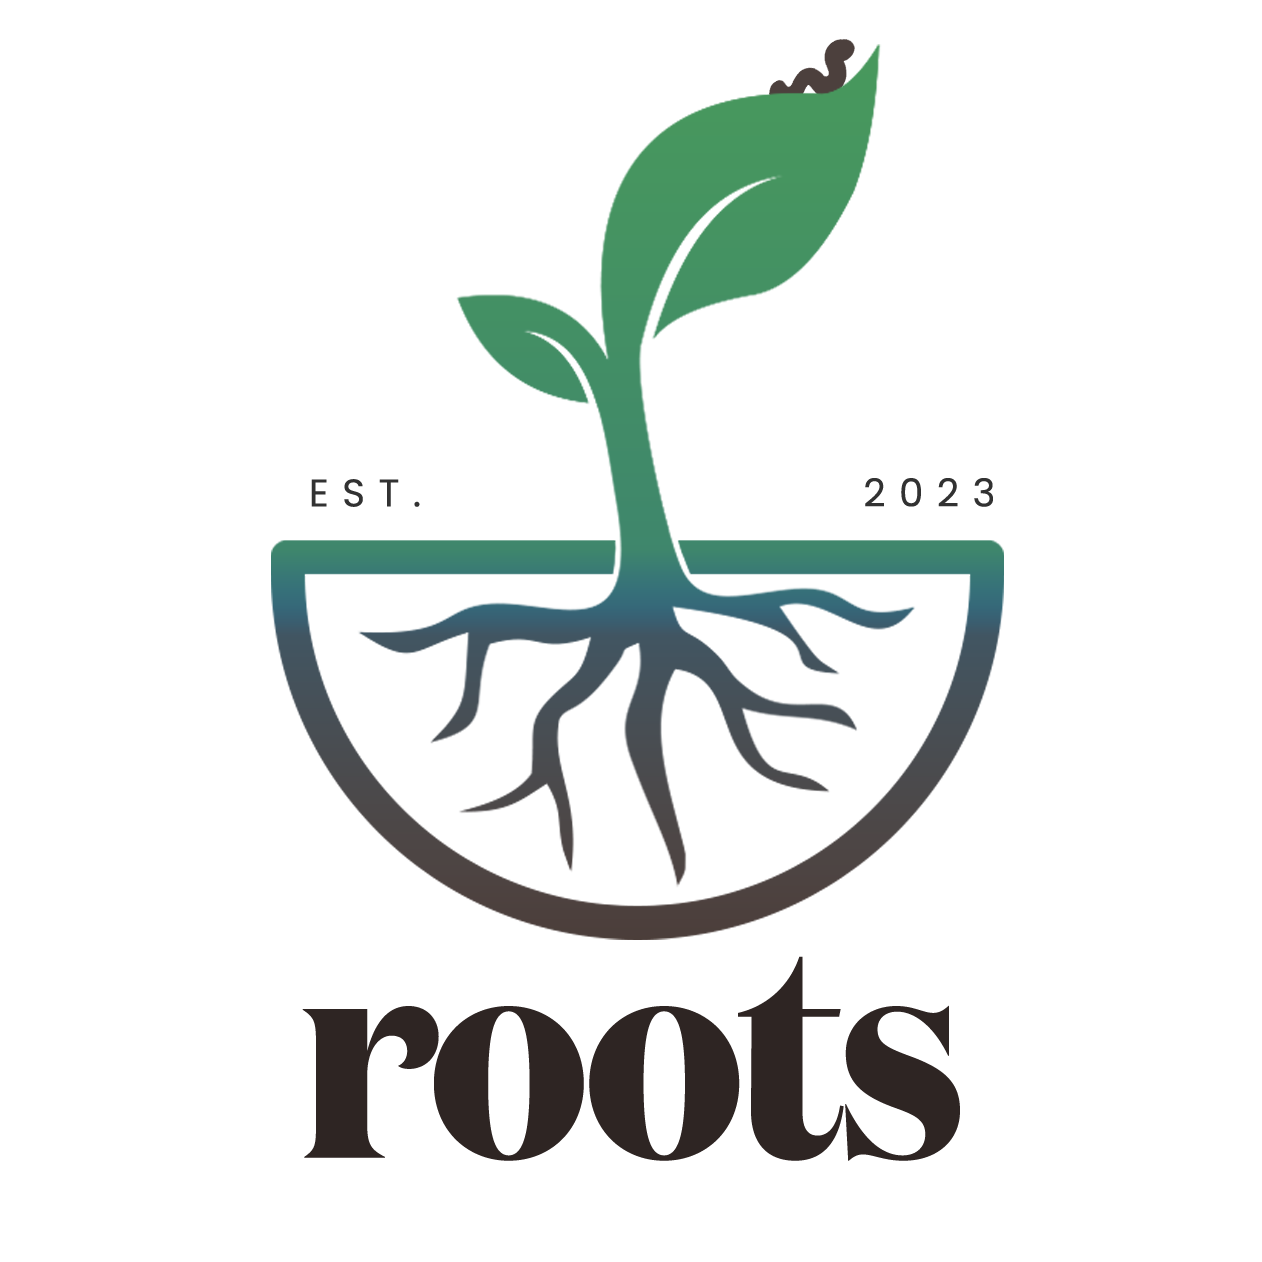 welcome to roots